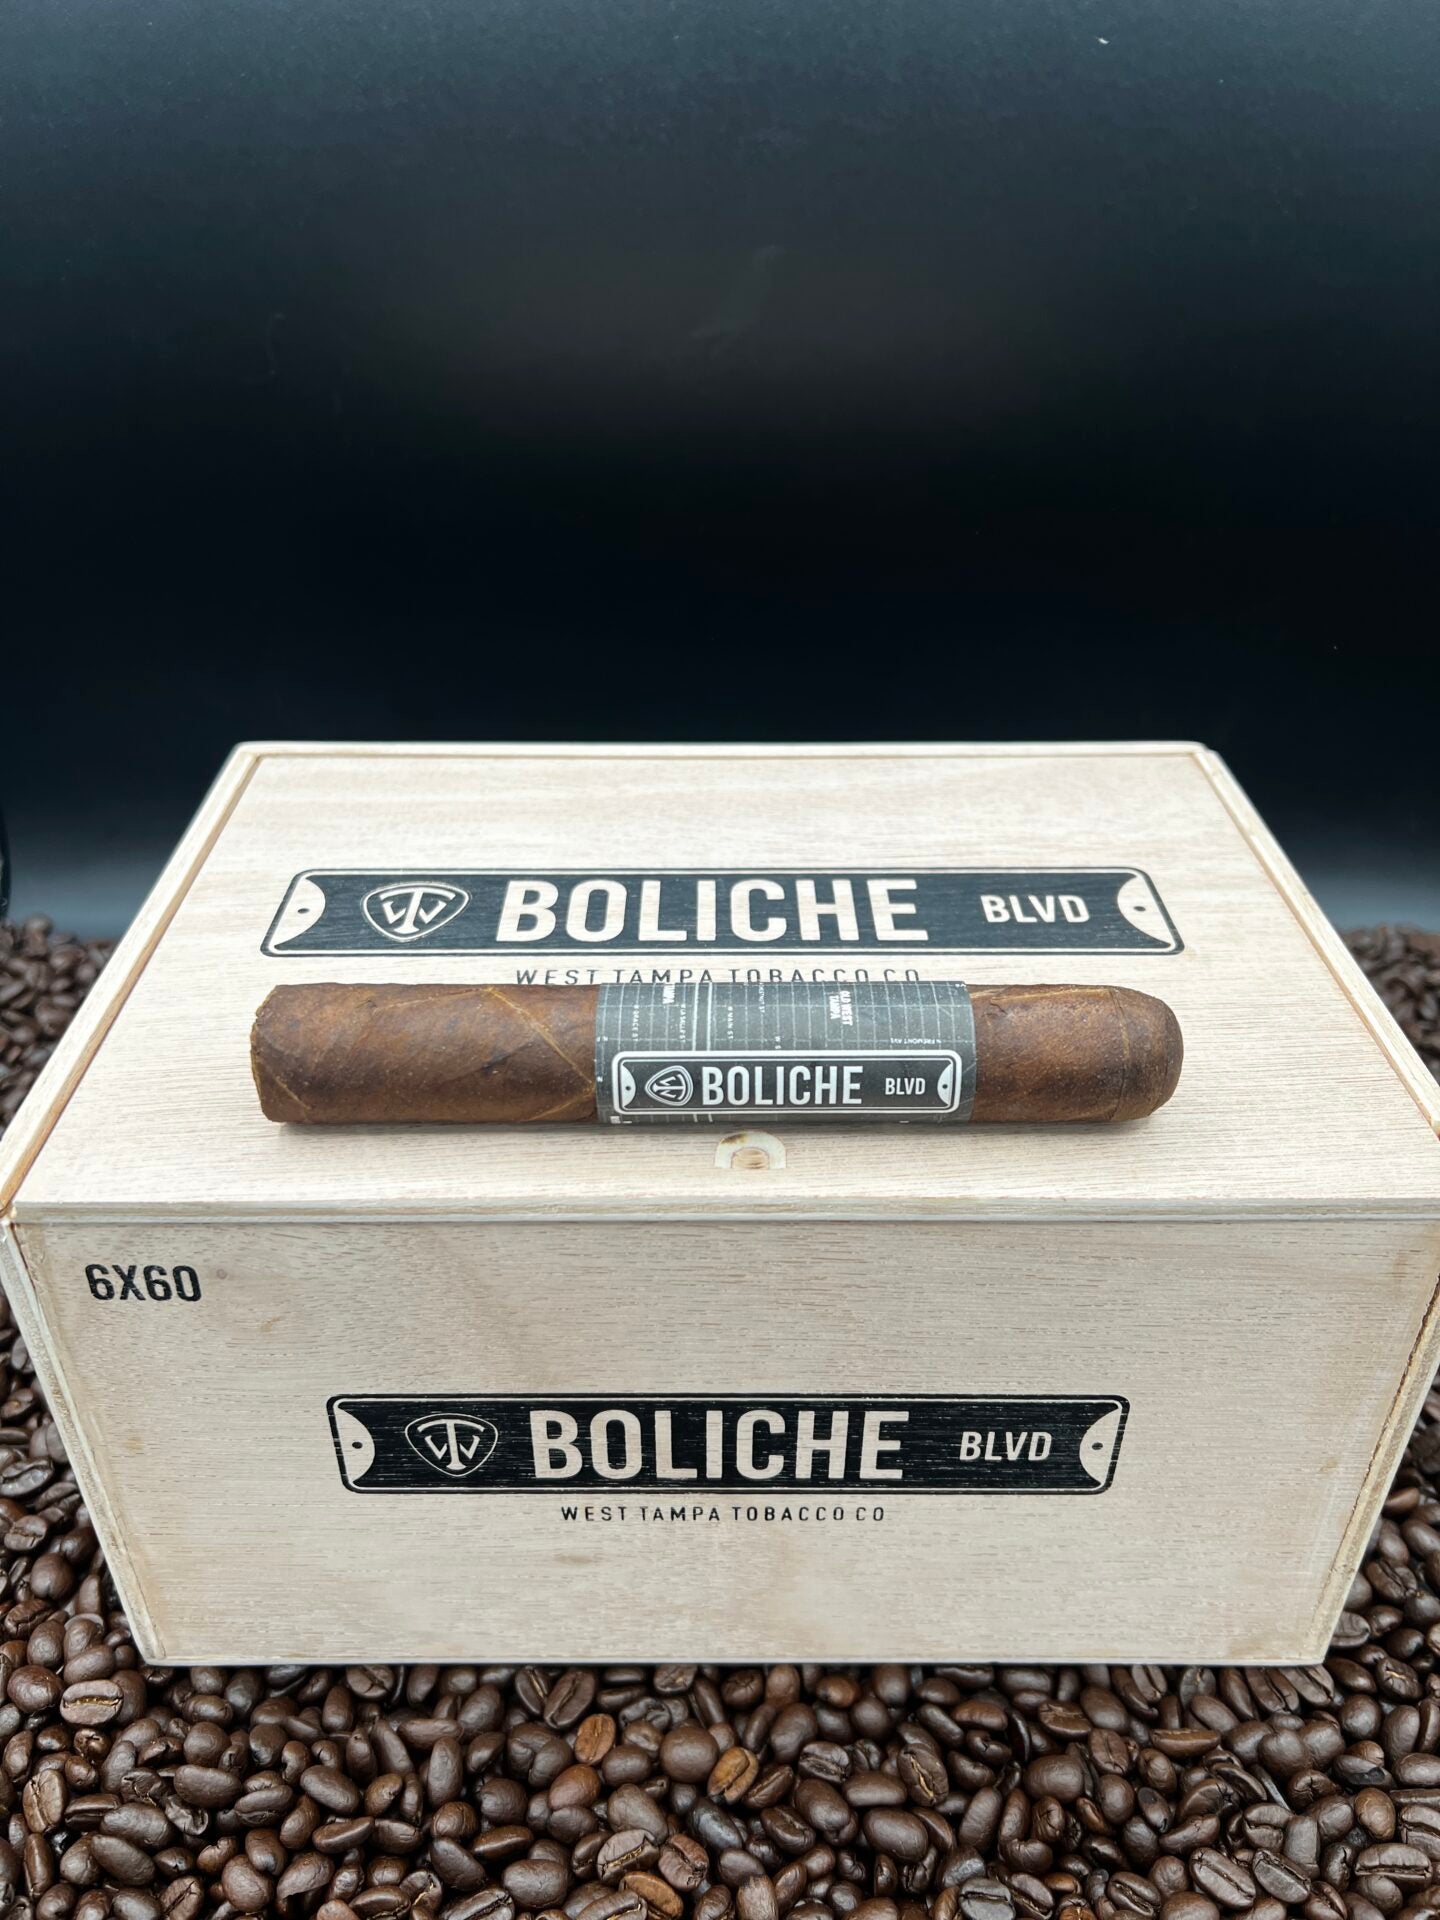 West Tampa Tobacco - Boliche Blvd cigars supplied by Sir Louis Cigars